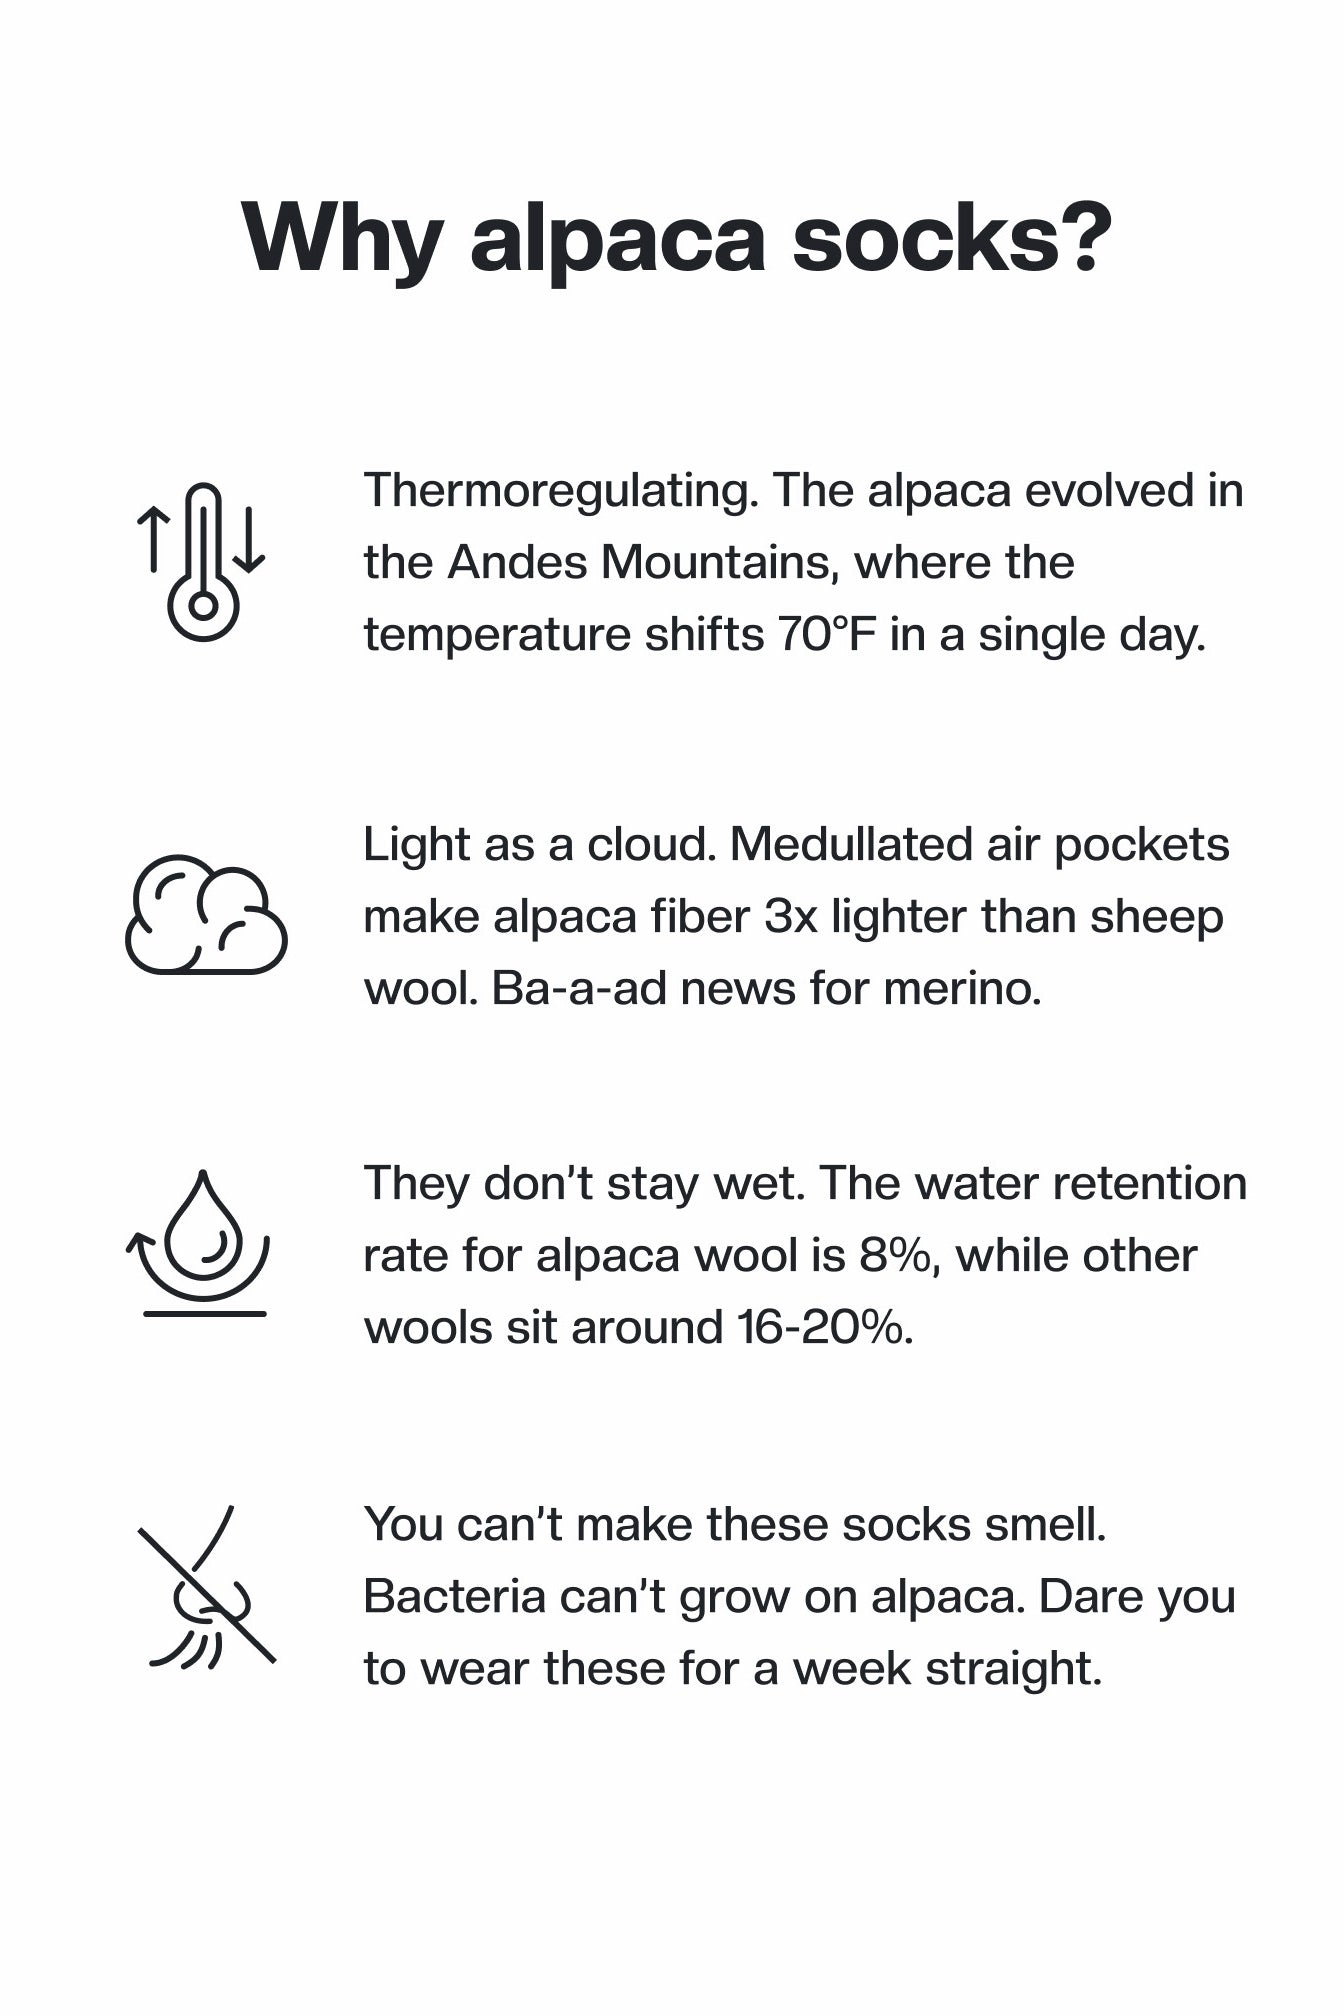 Why alpaca socks? Thermoregulating. The alpaca evolved in the Andes Mountains, where the temperature shifts 70°F a single day. They don't stay wet. The water retention rate for alpaca fiber is 8%, while other wools sit around 16-20%. Light as a cloud. Medullated air pockets make alpaca fiber 3x lighter thank sheep wool. Ba-a-ad news for merino. You can't make these socks smell. Bacteria can't grow on alpaca. Dare you to wear these for a week straight.